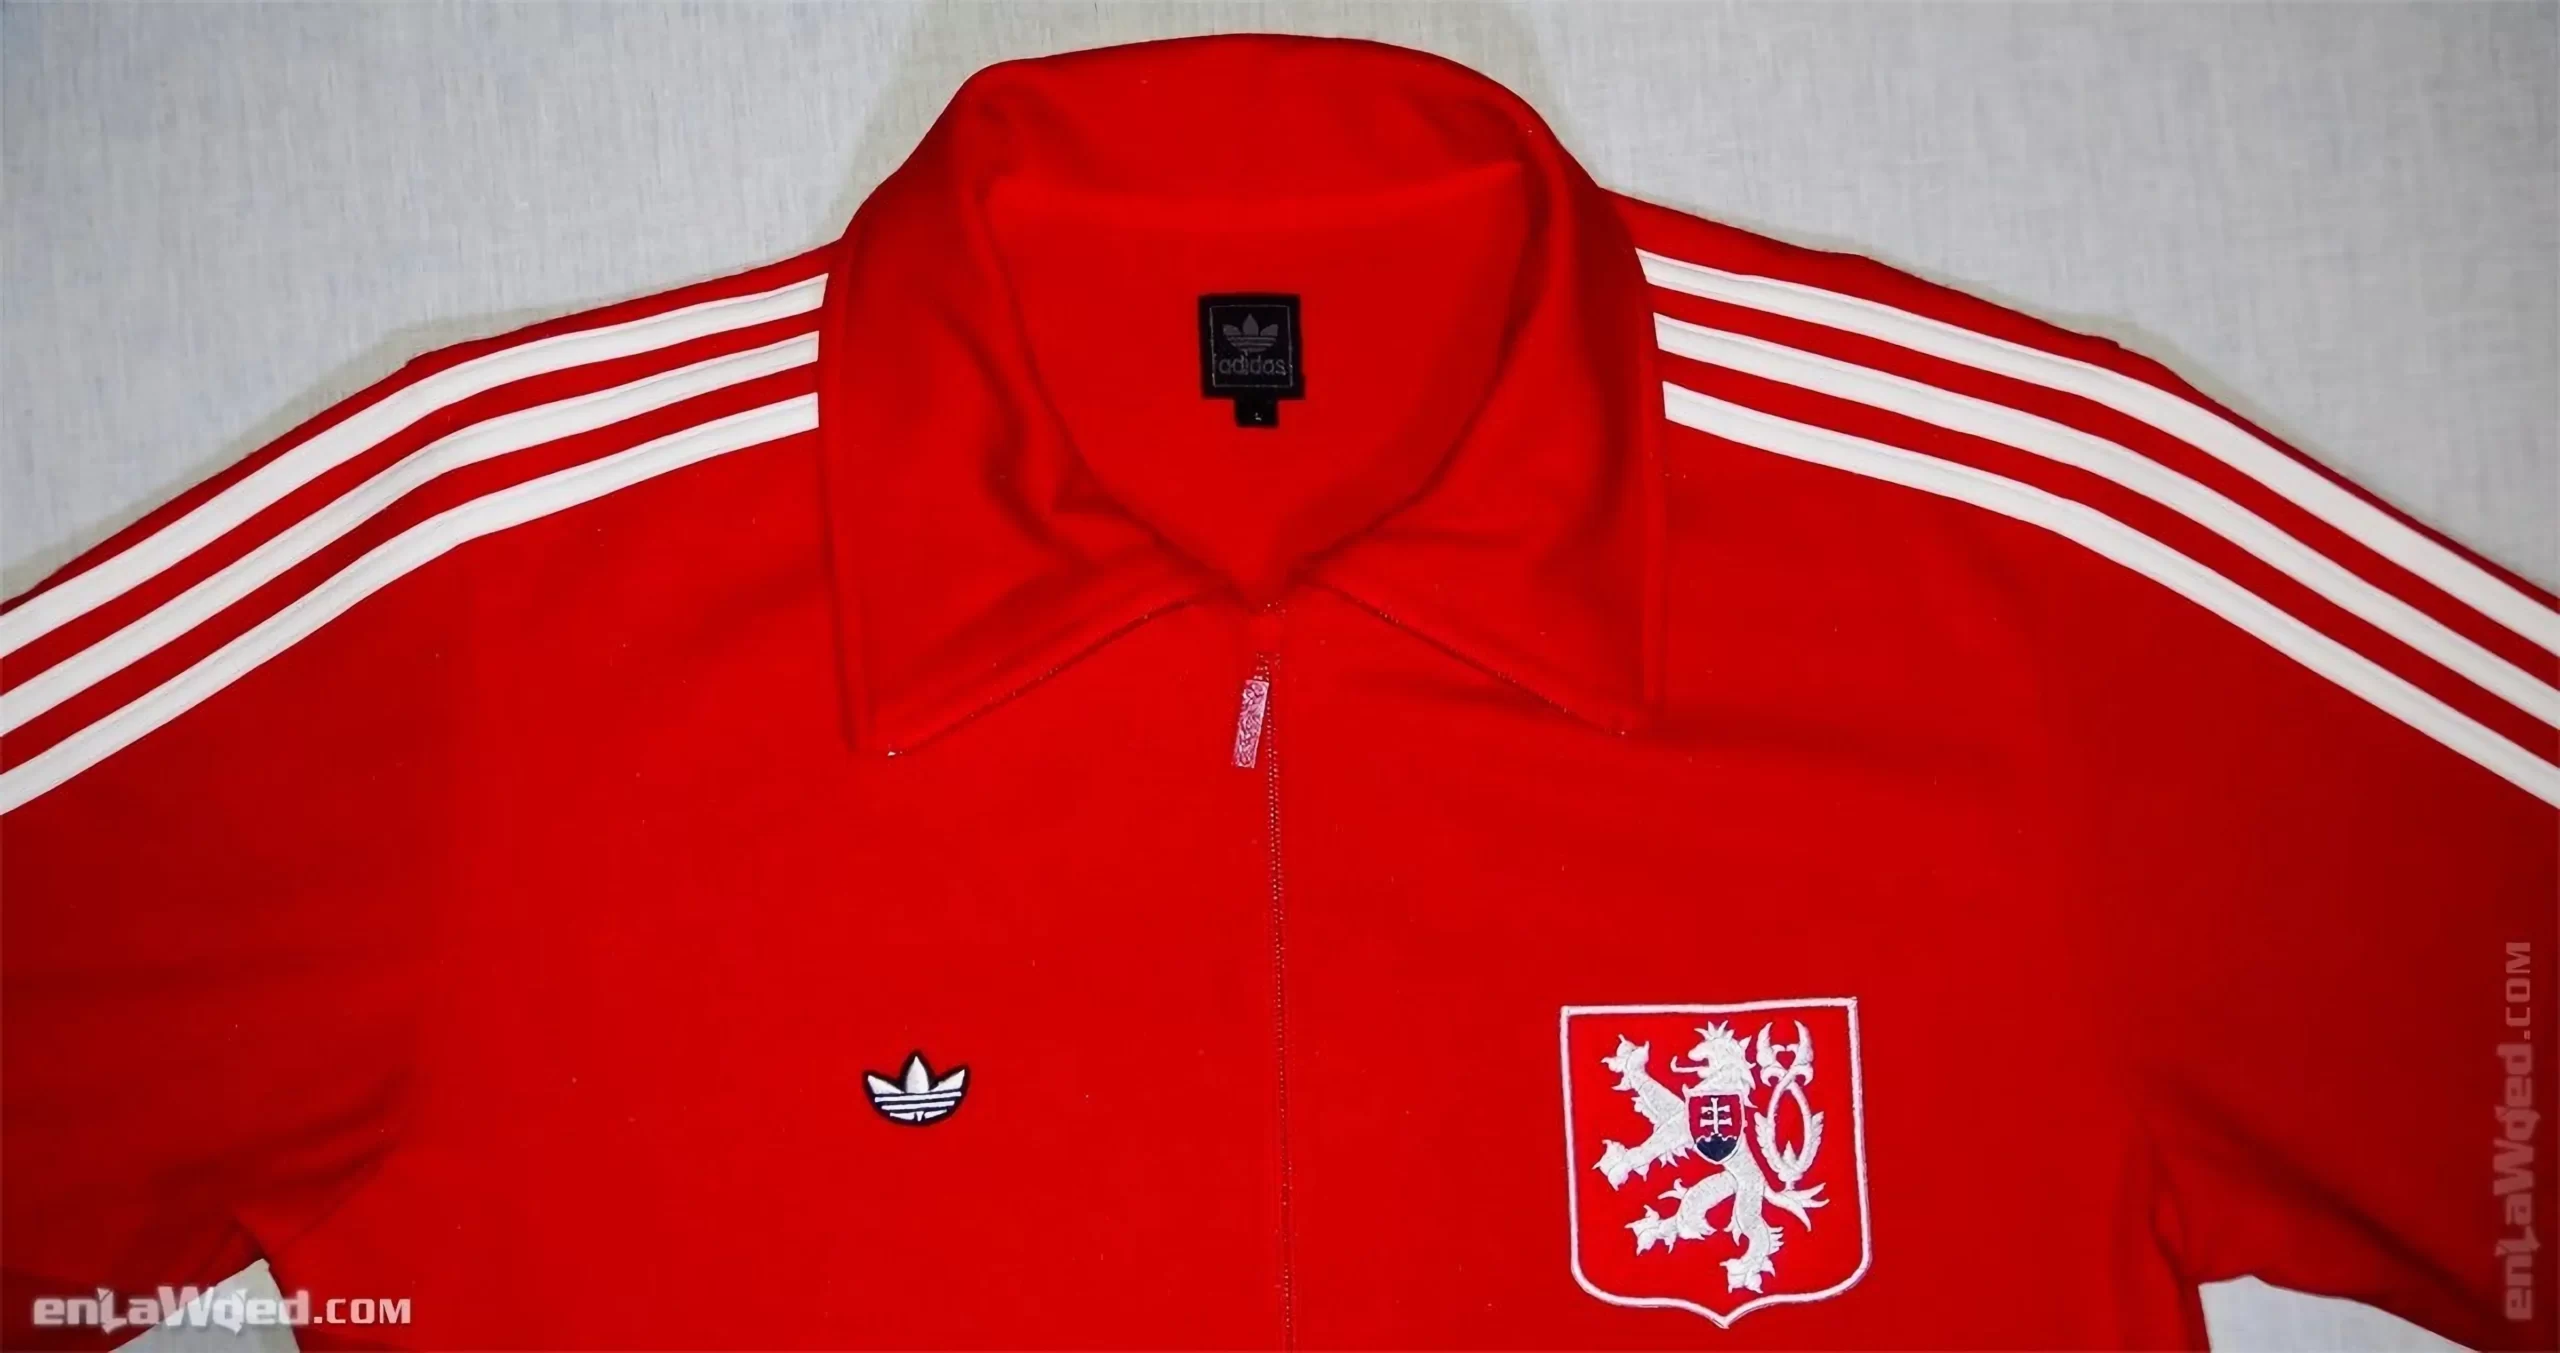 Men’s 2007 Slovakia Love Track Top by Adidas Originals: Uncovered (EnLawded.com file #lmcgfkfi5ku9p5syr3y)